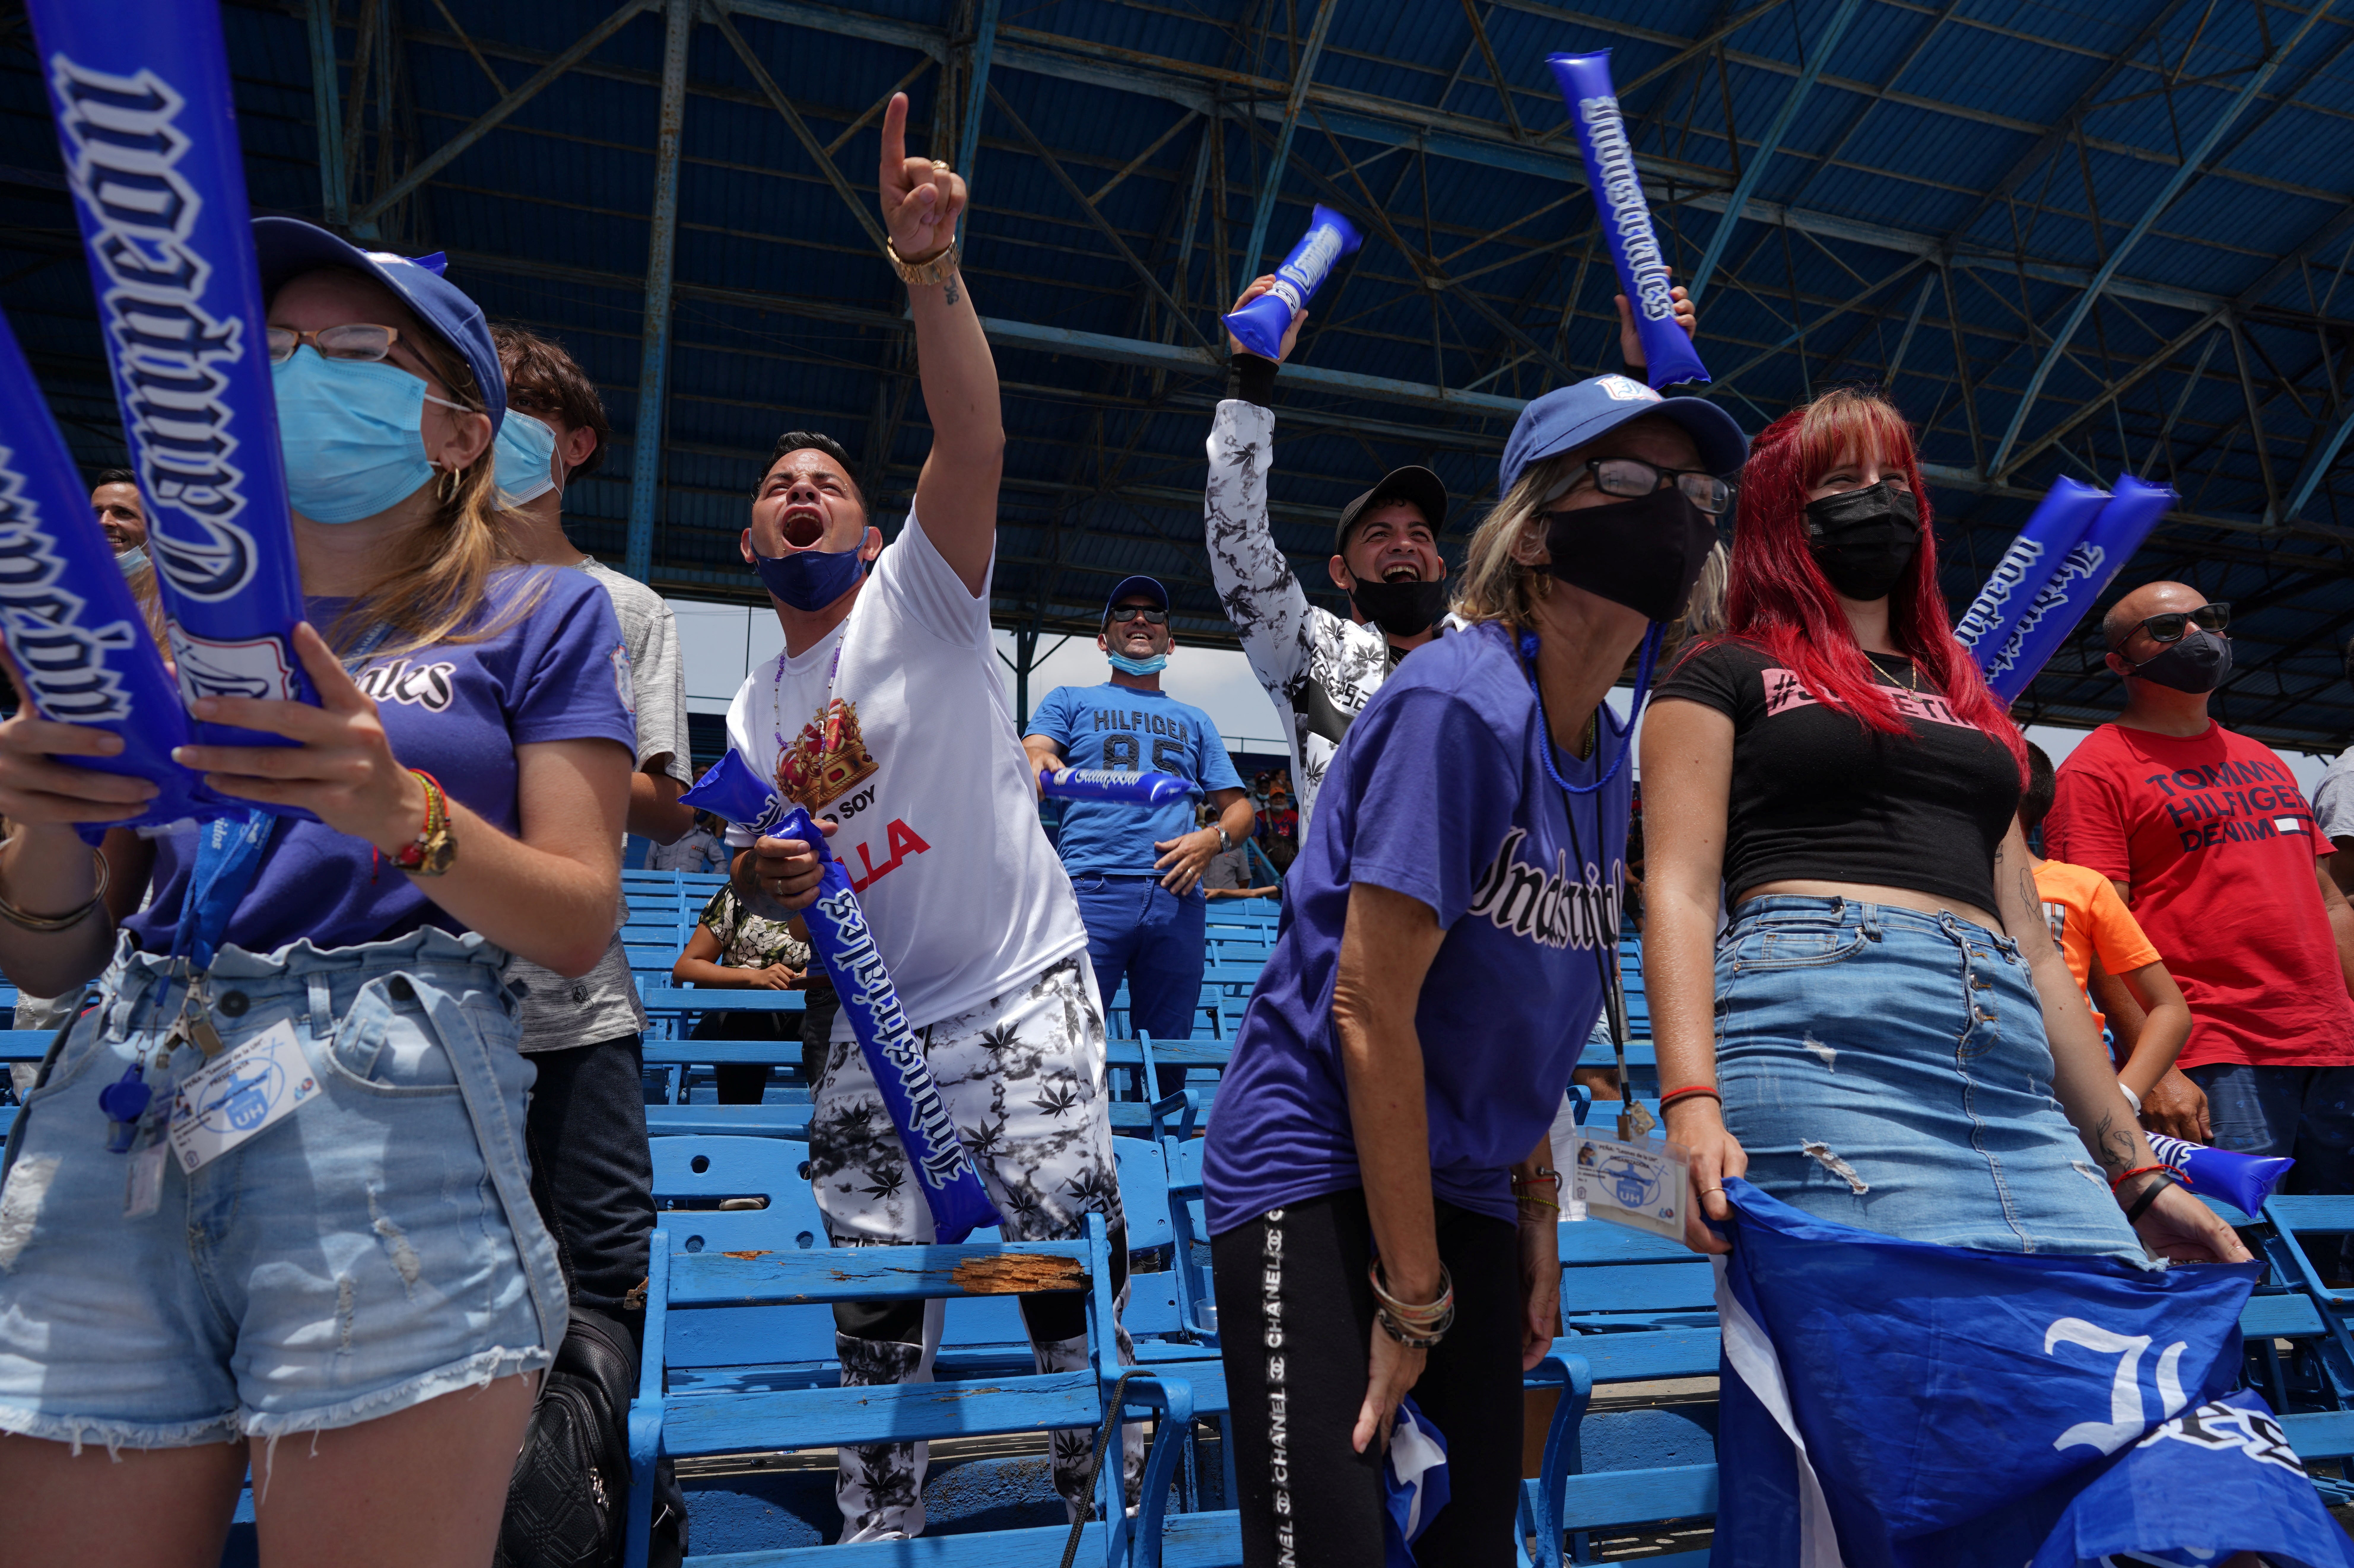 Supporters of Industriales baseball team react during a match against Artemisa